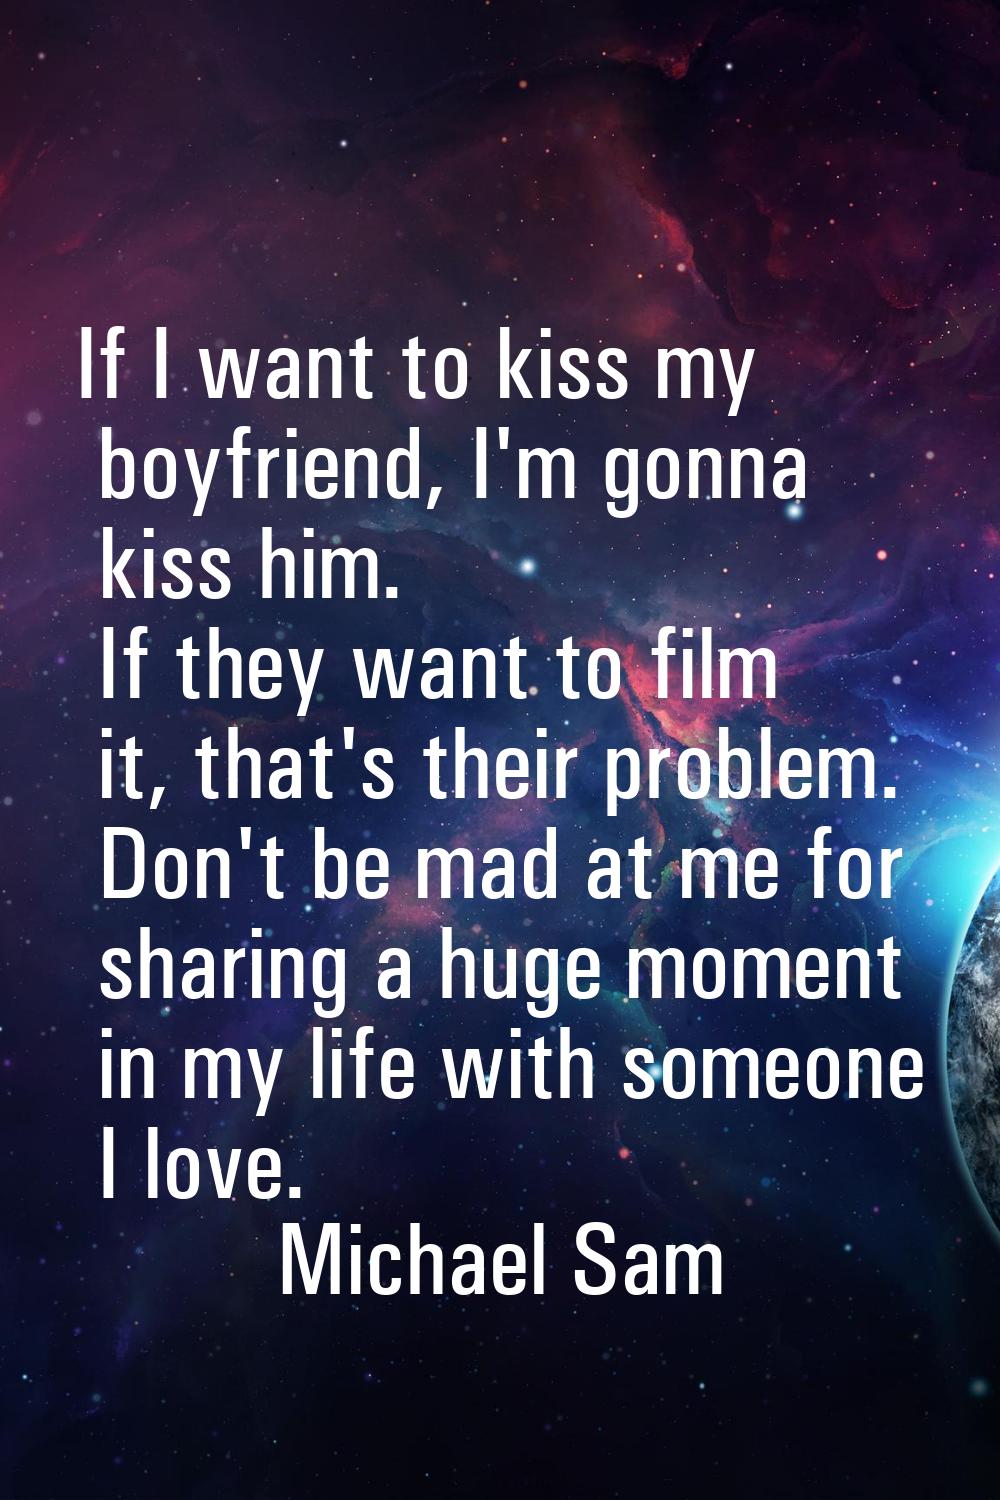 If I want to kiss my boyfriend, I'm gonna kiss him. If they want to film it, that's their problem. 